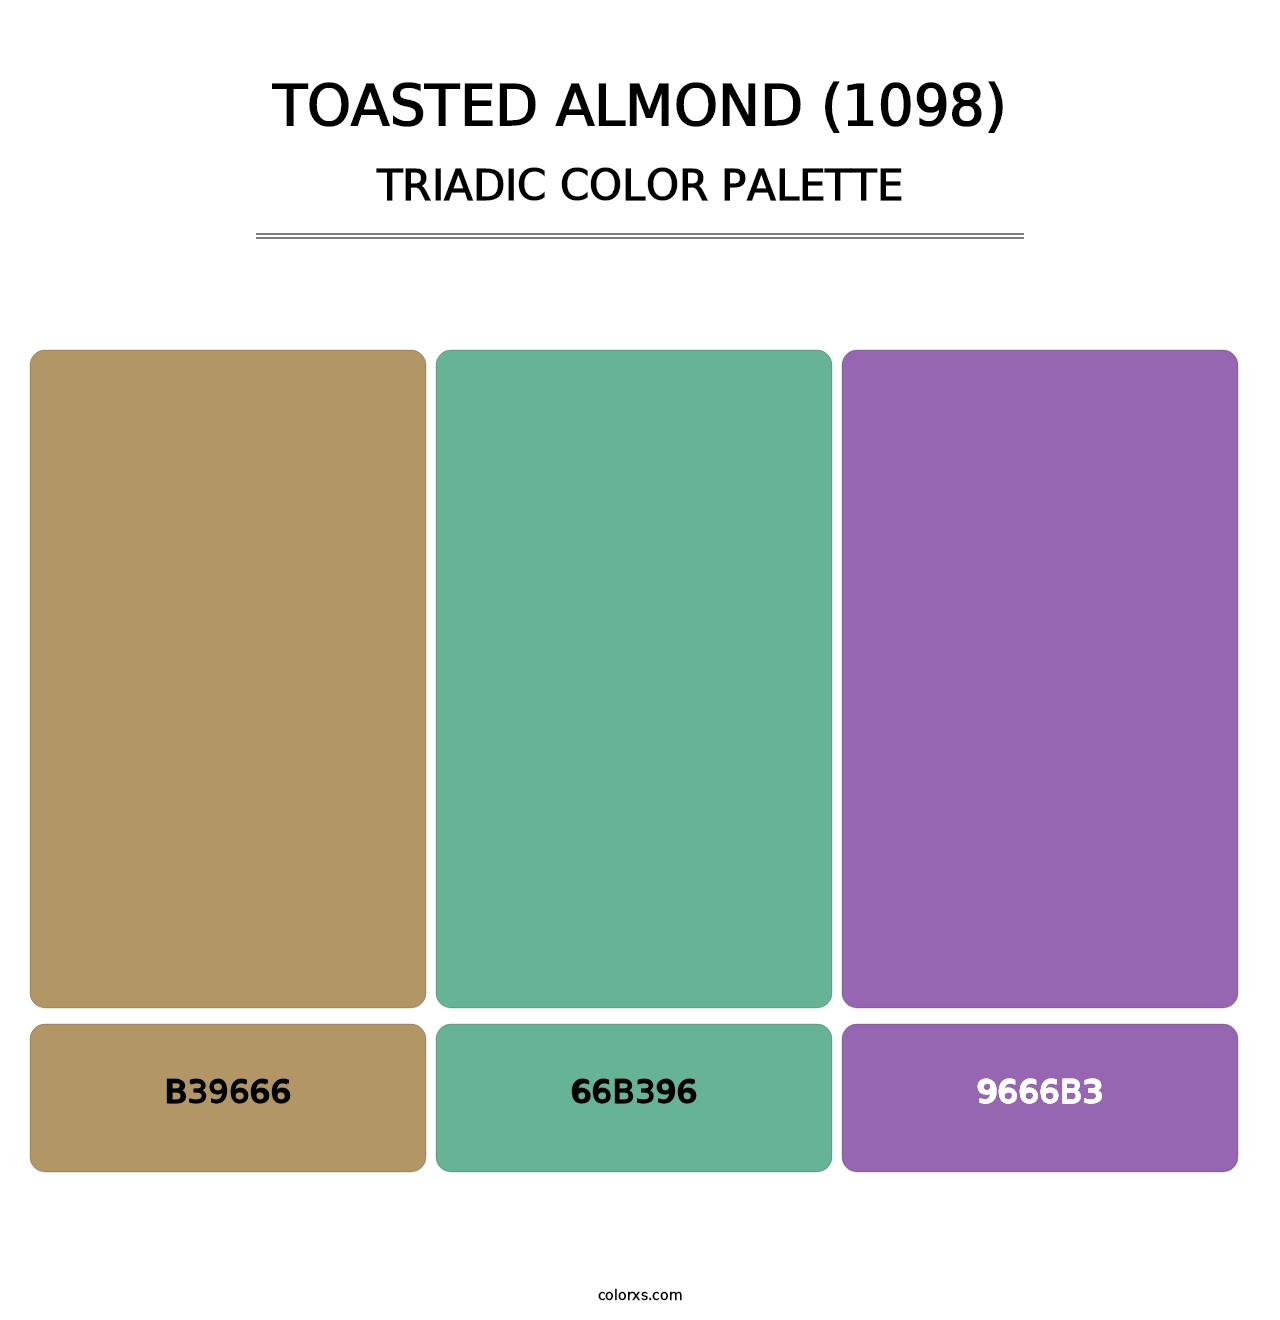 Toasted Almond (1098) - Triadic Color Palette